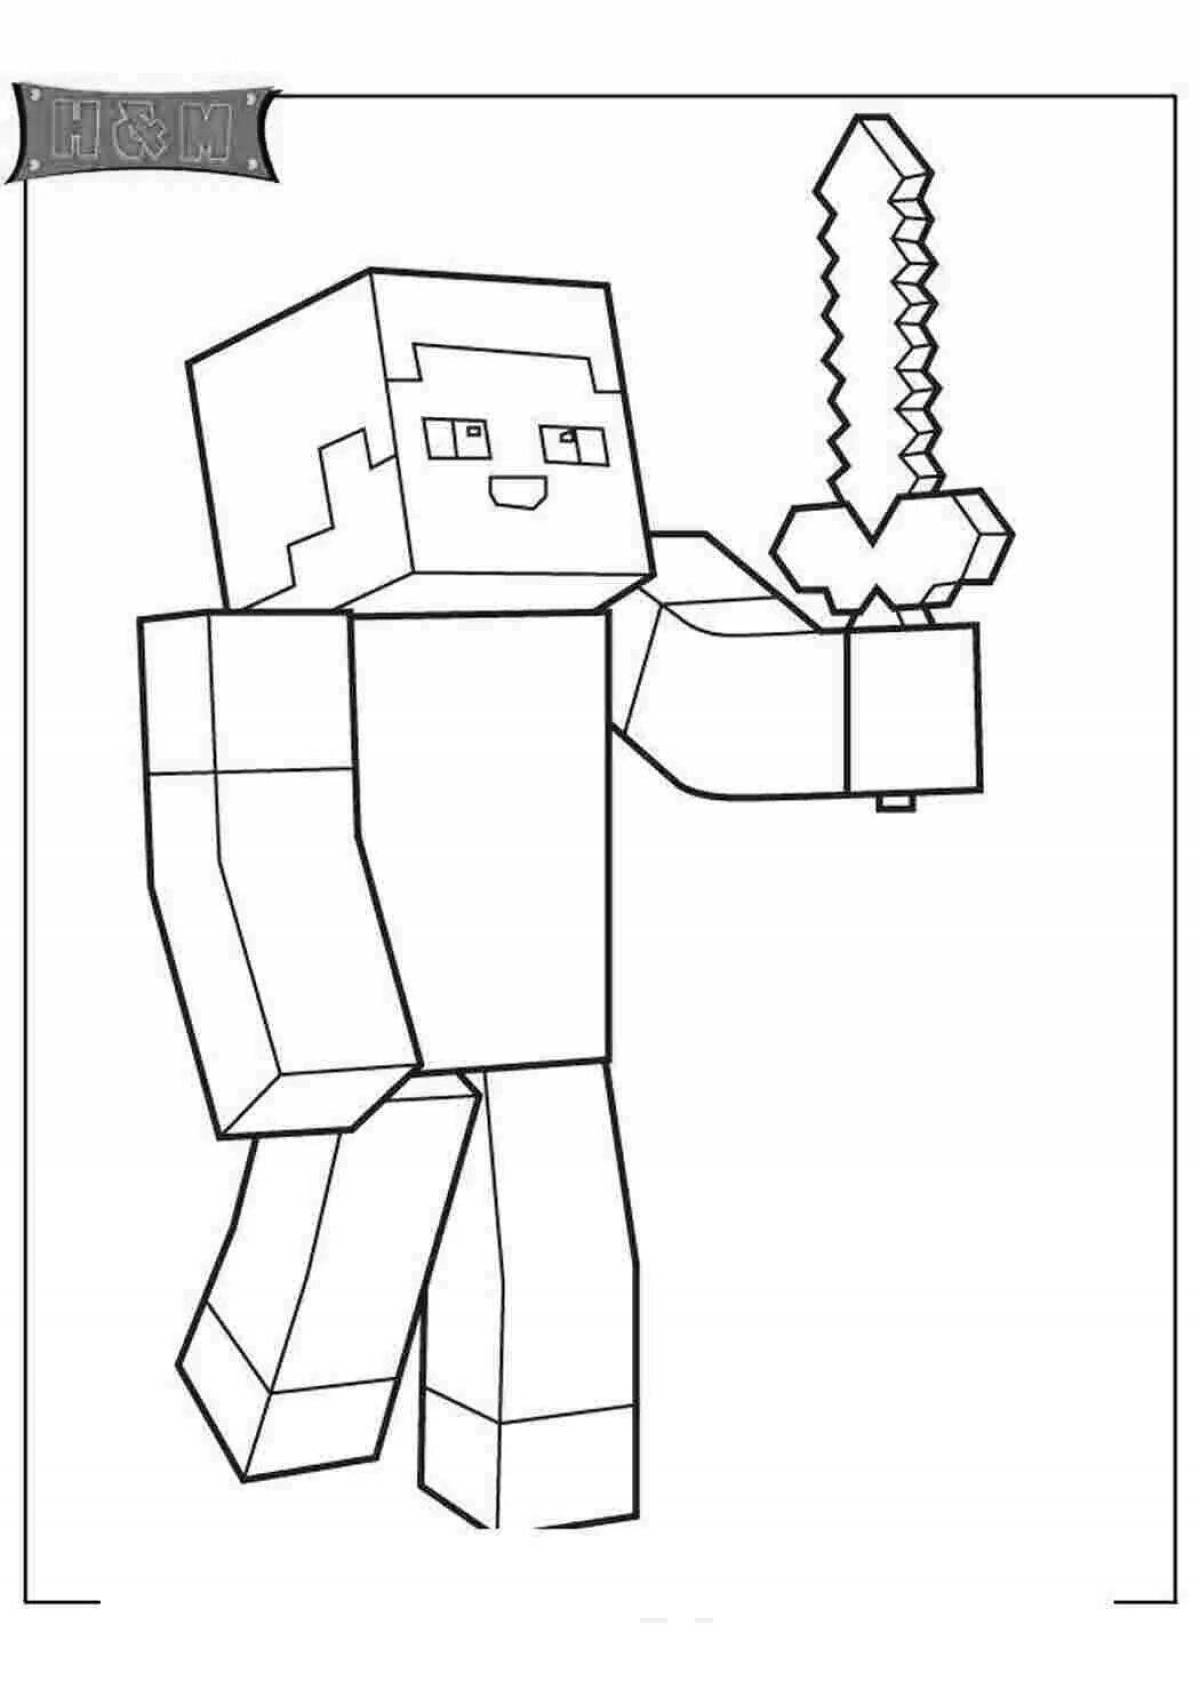 Funny steve and alex coloring book